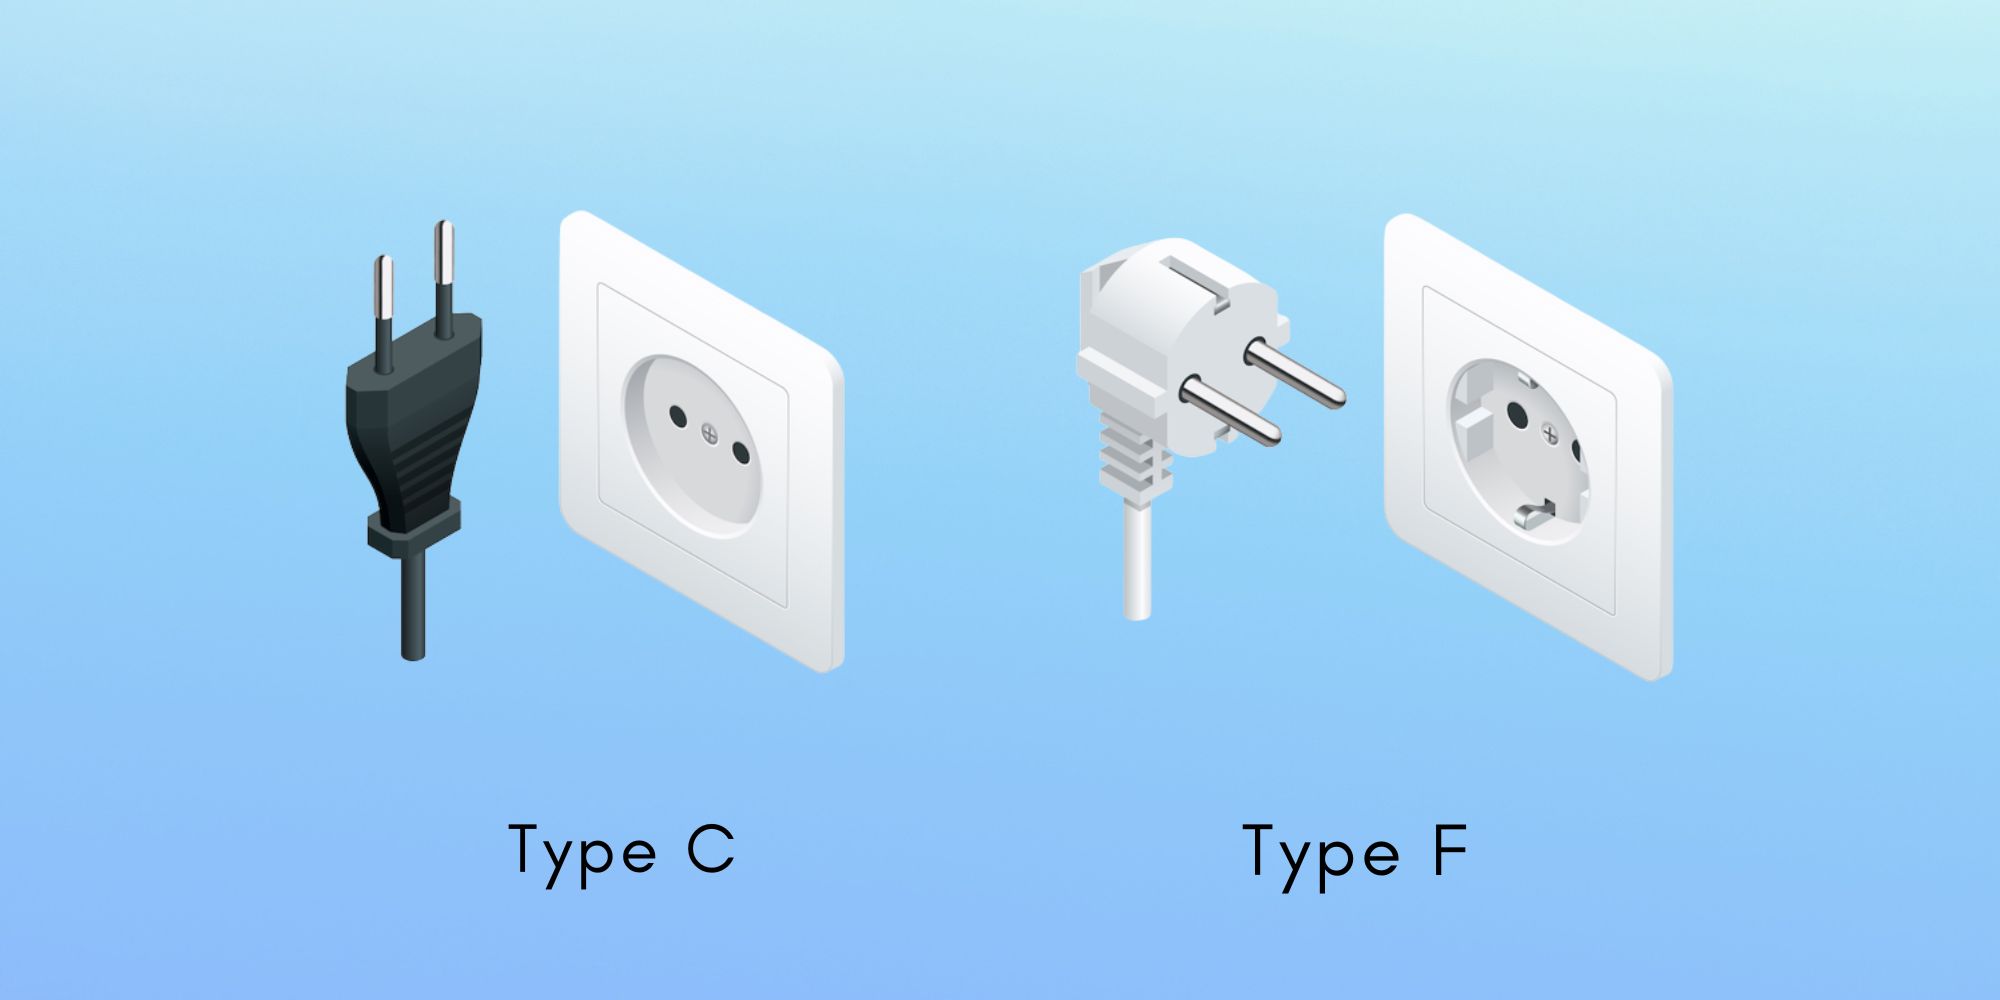 Romania Power Plugs and Sockets: Type C and Type F
